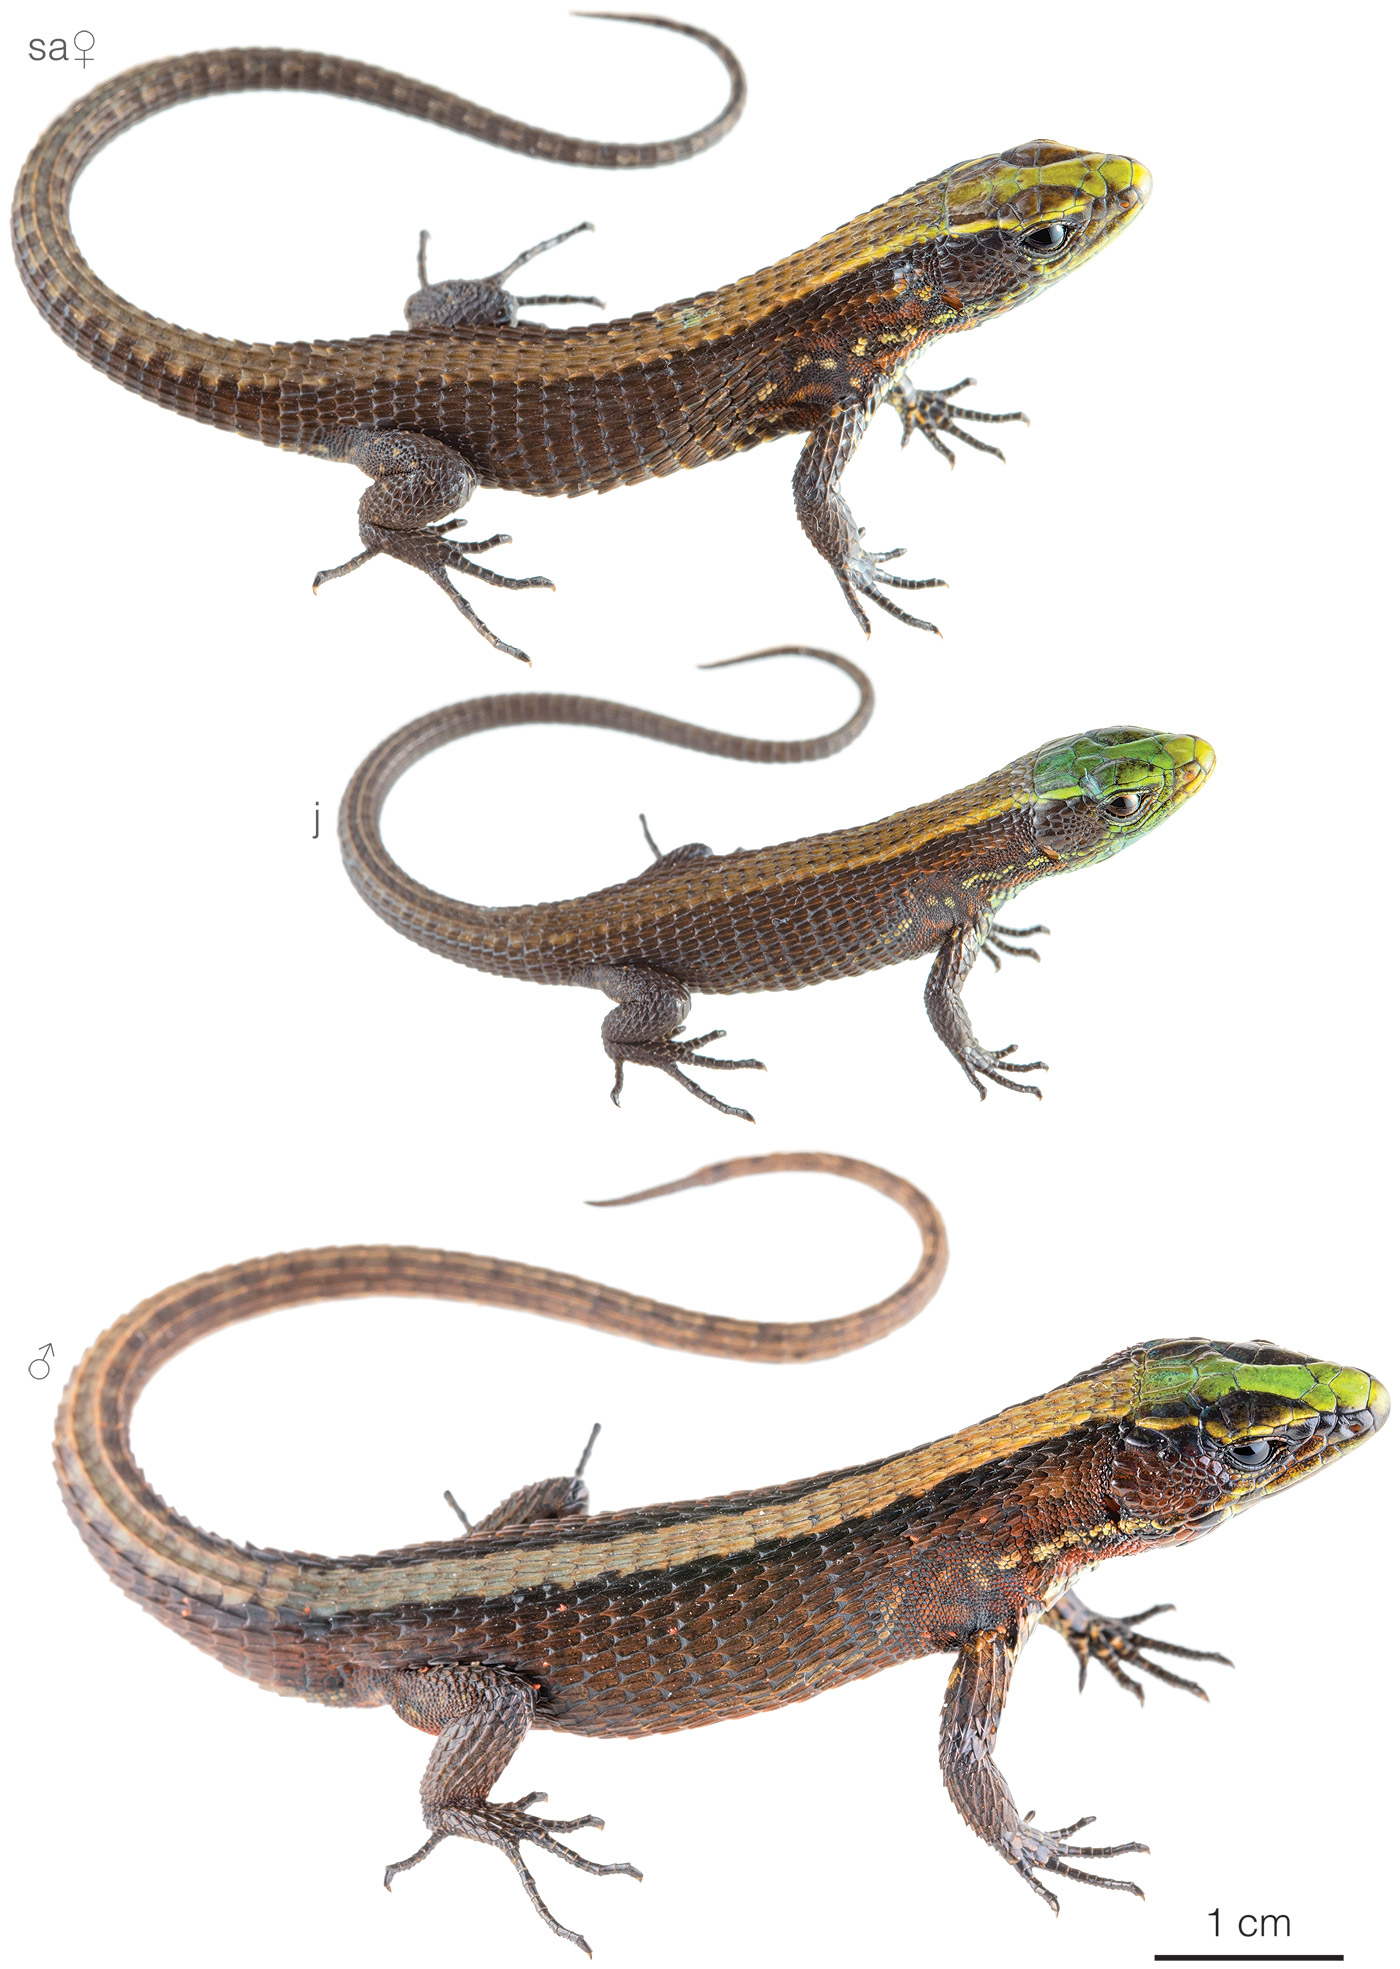 Figure showing variation among individuals of Alopoglossus viridiceps